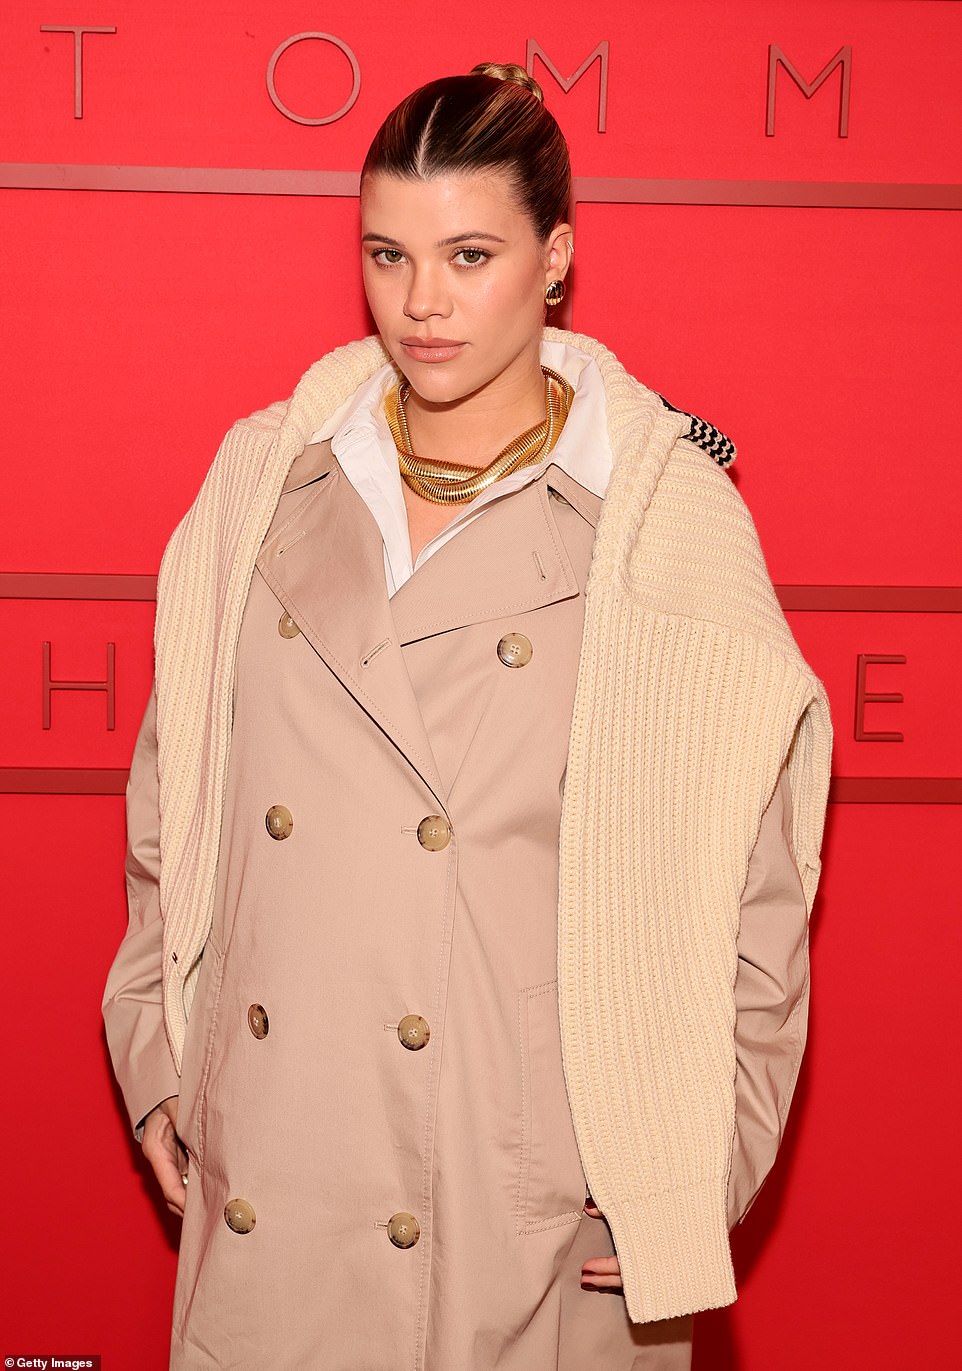 The brand's new ambassador, Sofia, 25, cradled her baby bump in a chic tan trench coat.